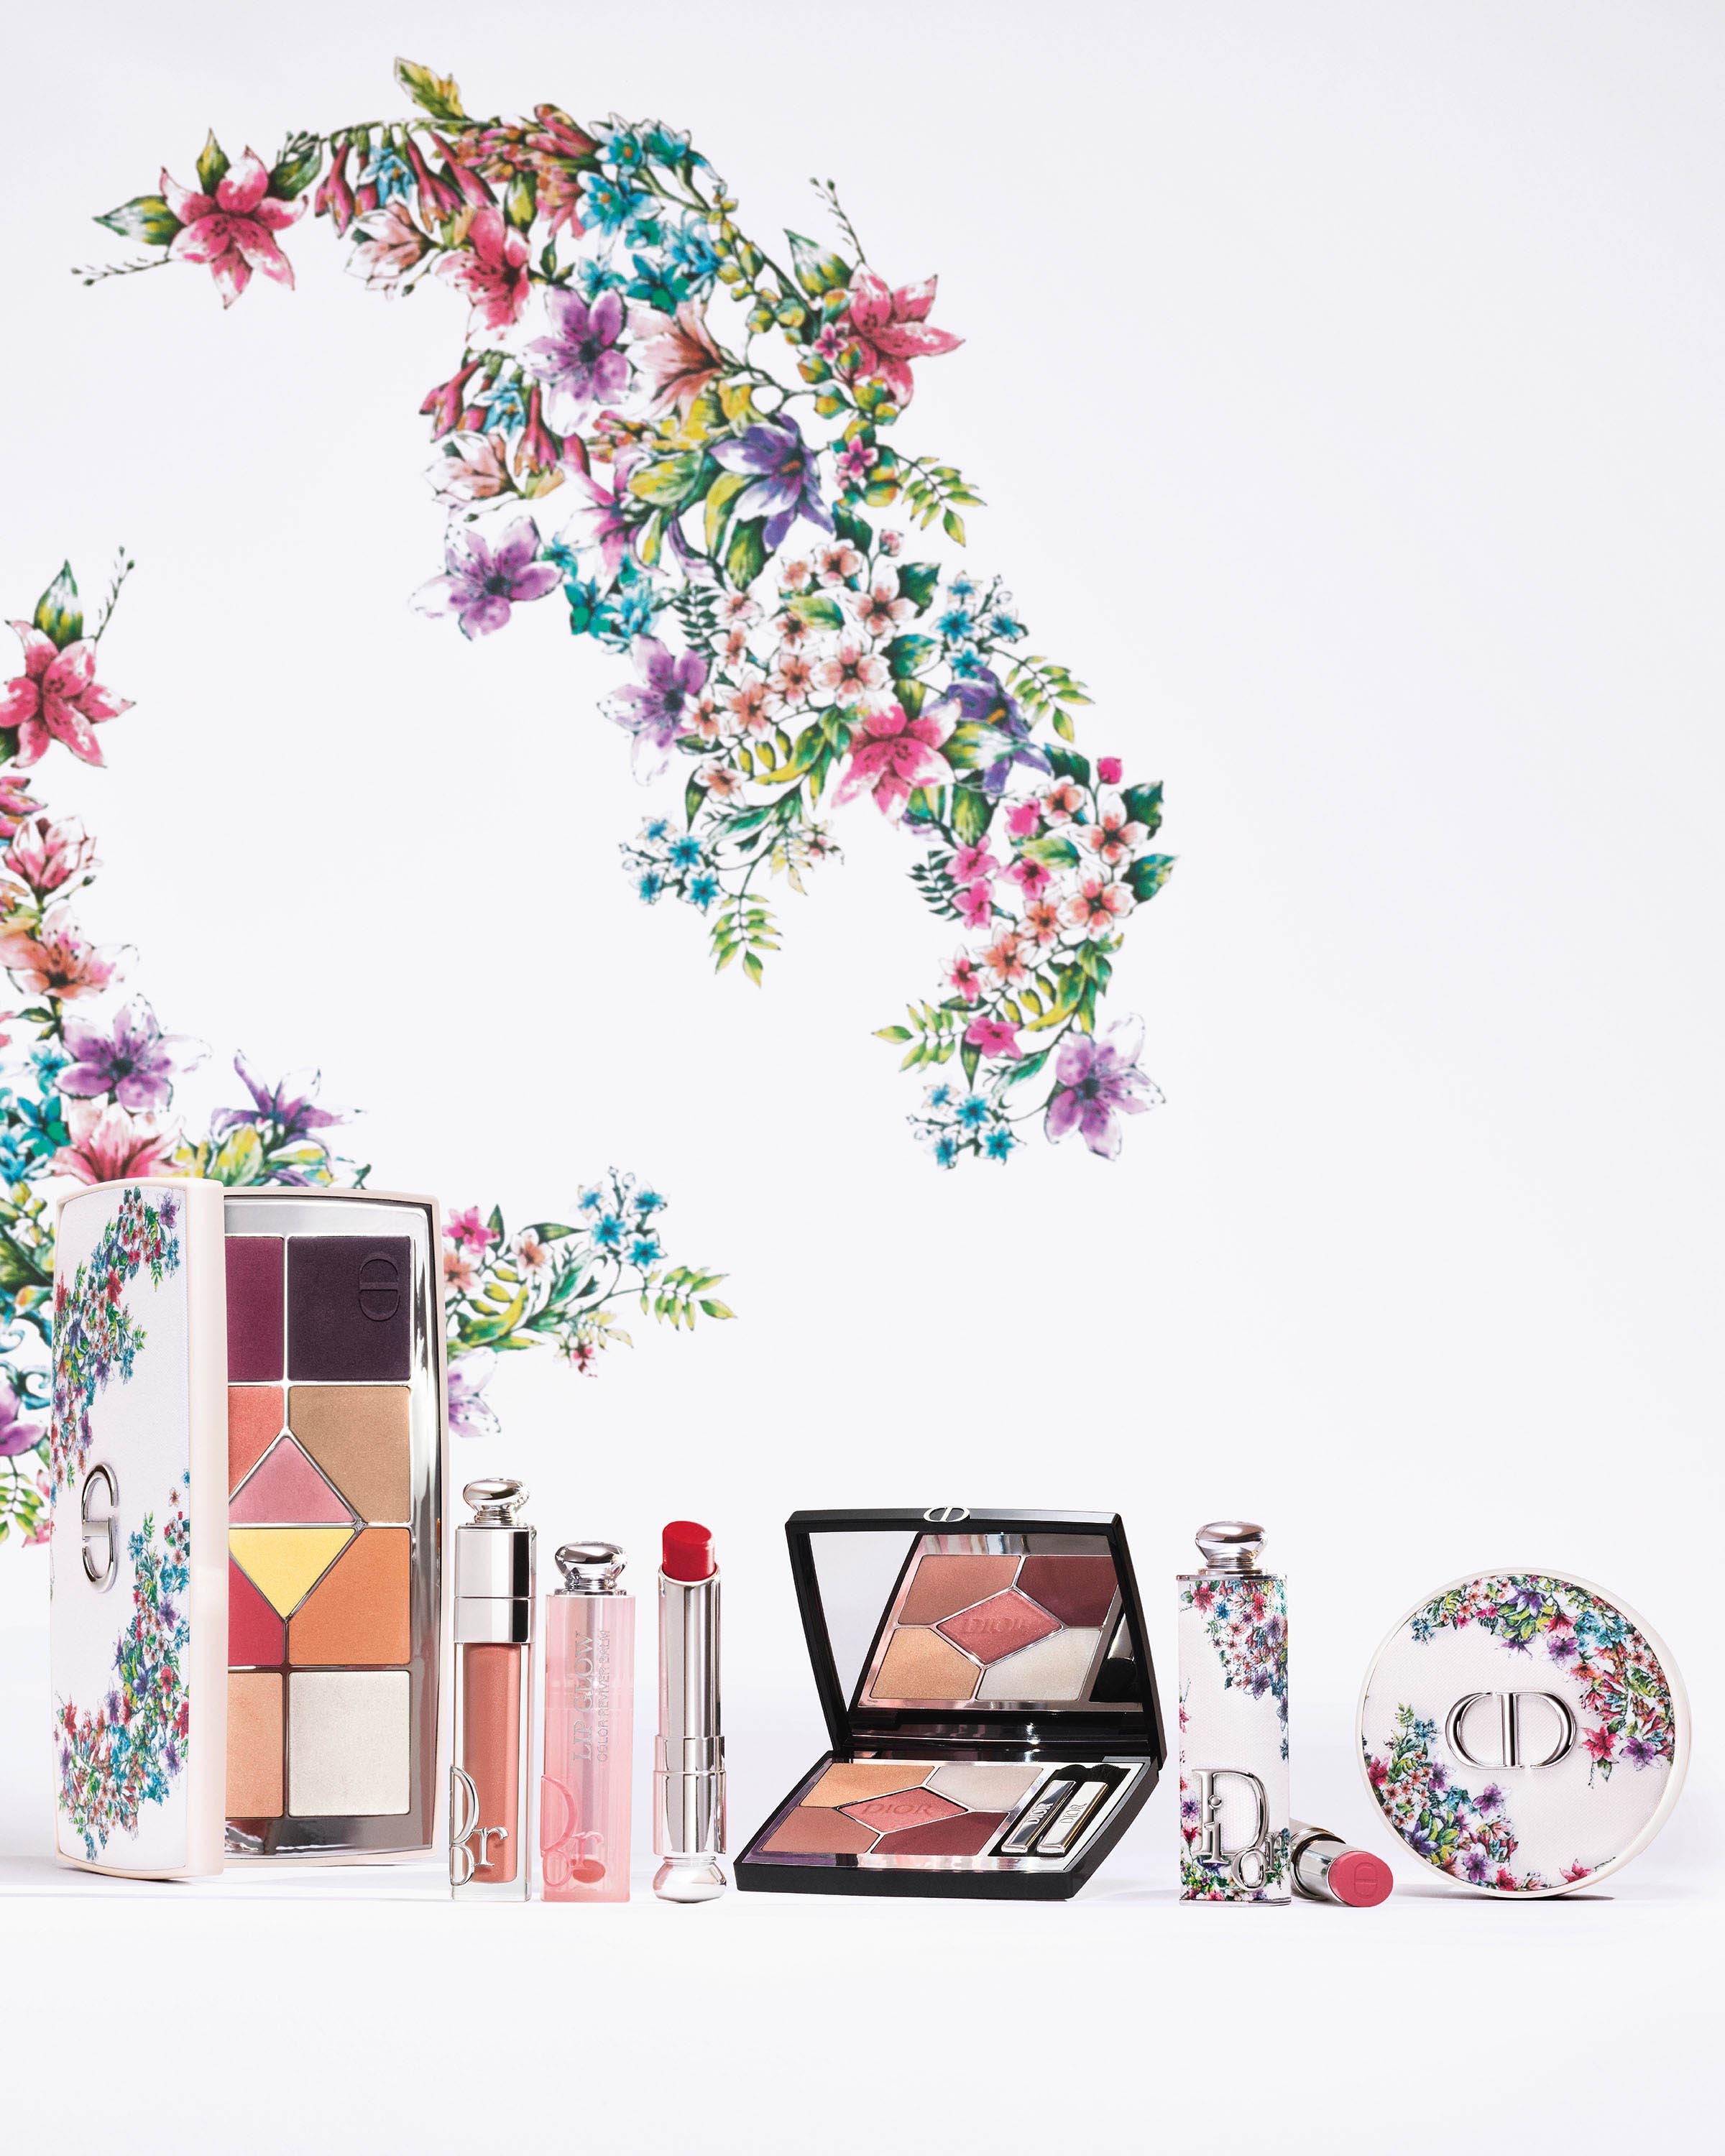 The Blooming Boudoir limited-edition makeup line